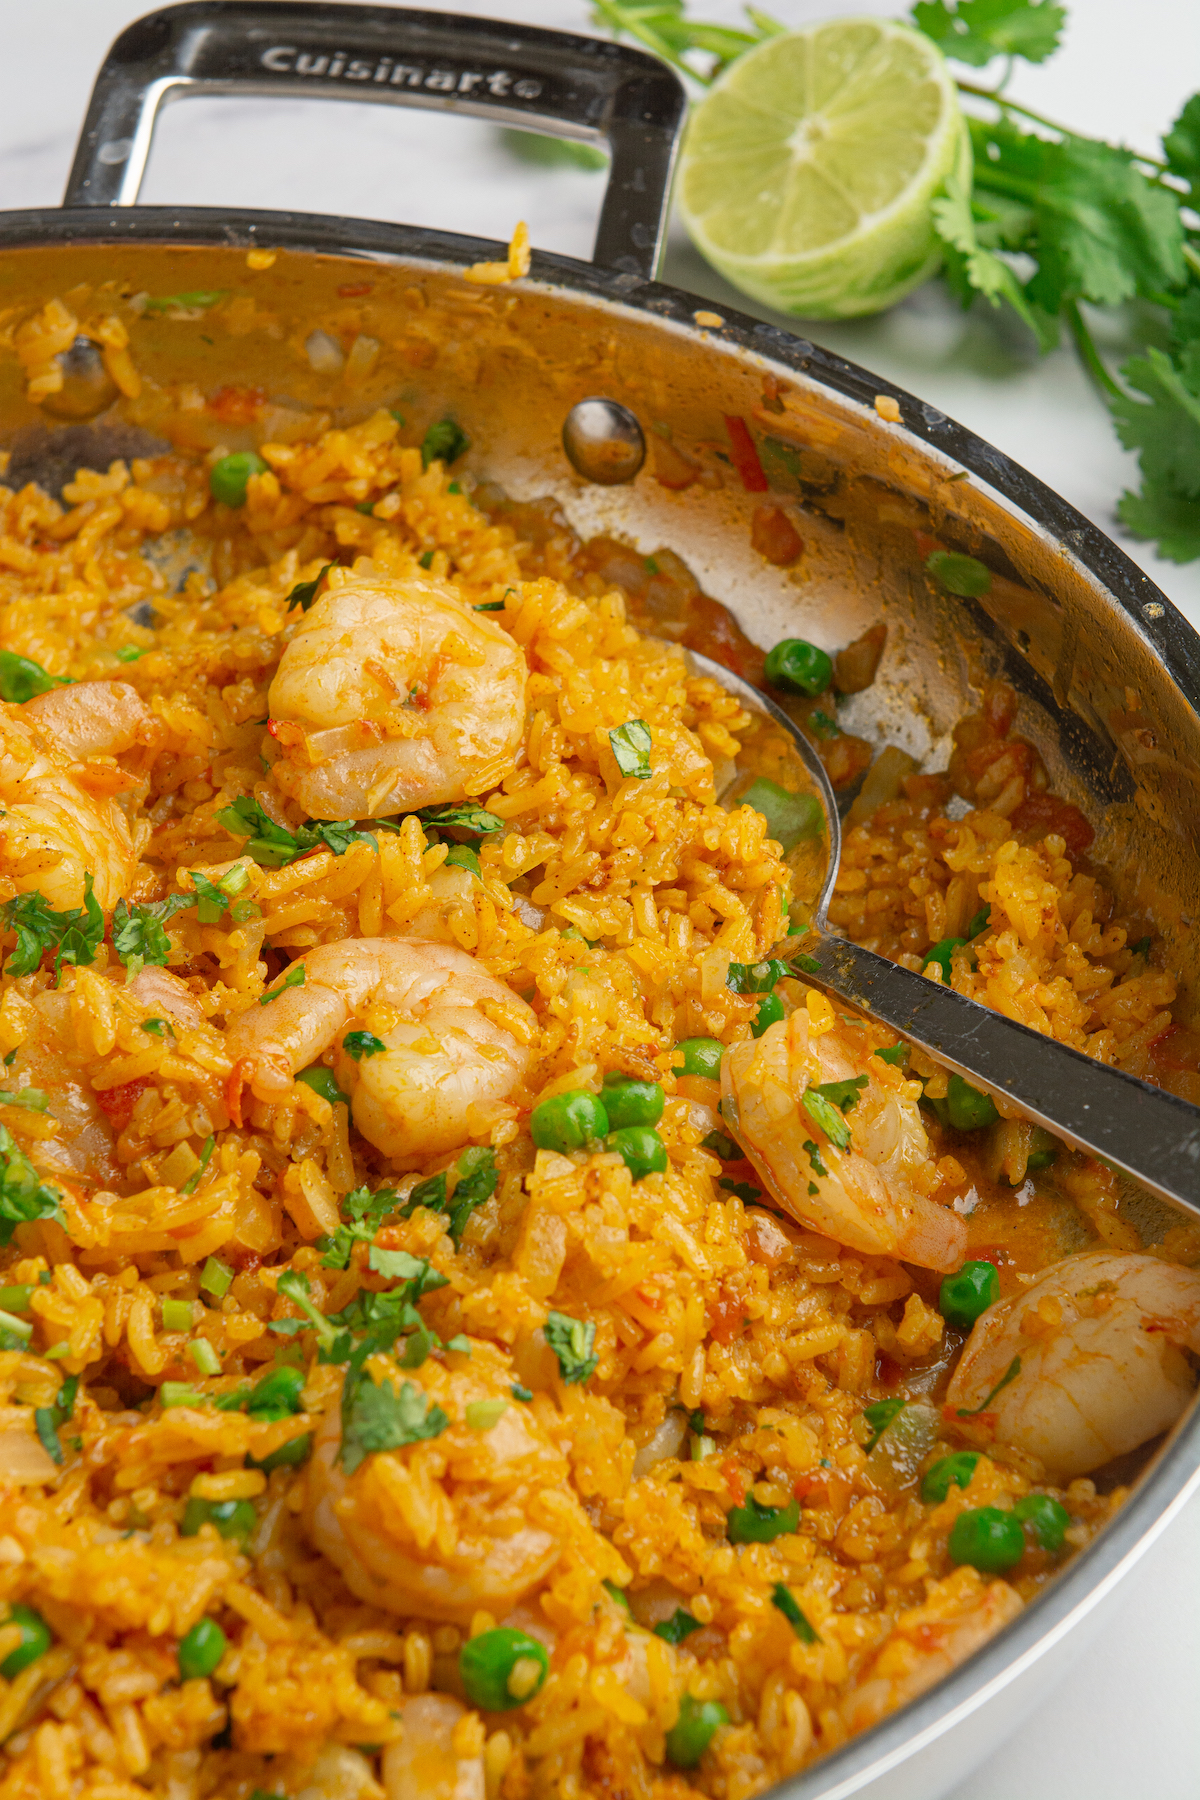 A large stainless steel skillet with cooked arroz con camarones or shrimp and rice with cilantro and sweet peas. Half a lime and a bunch of cilantro in the background.